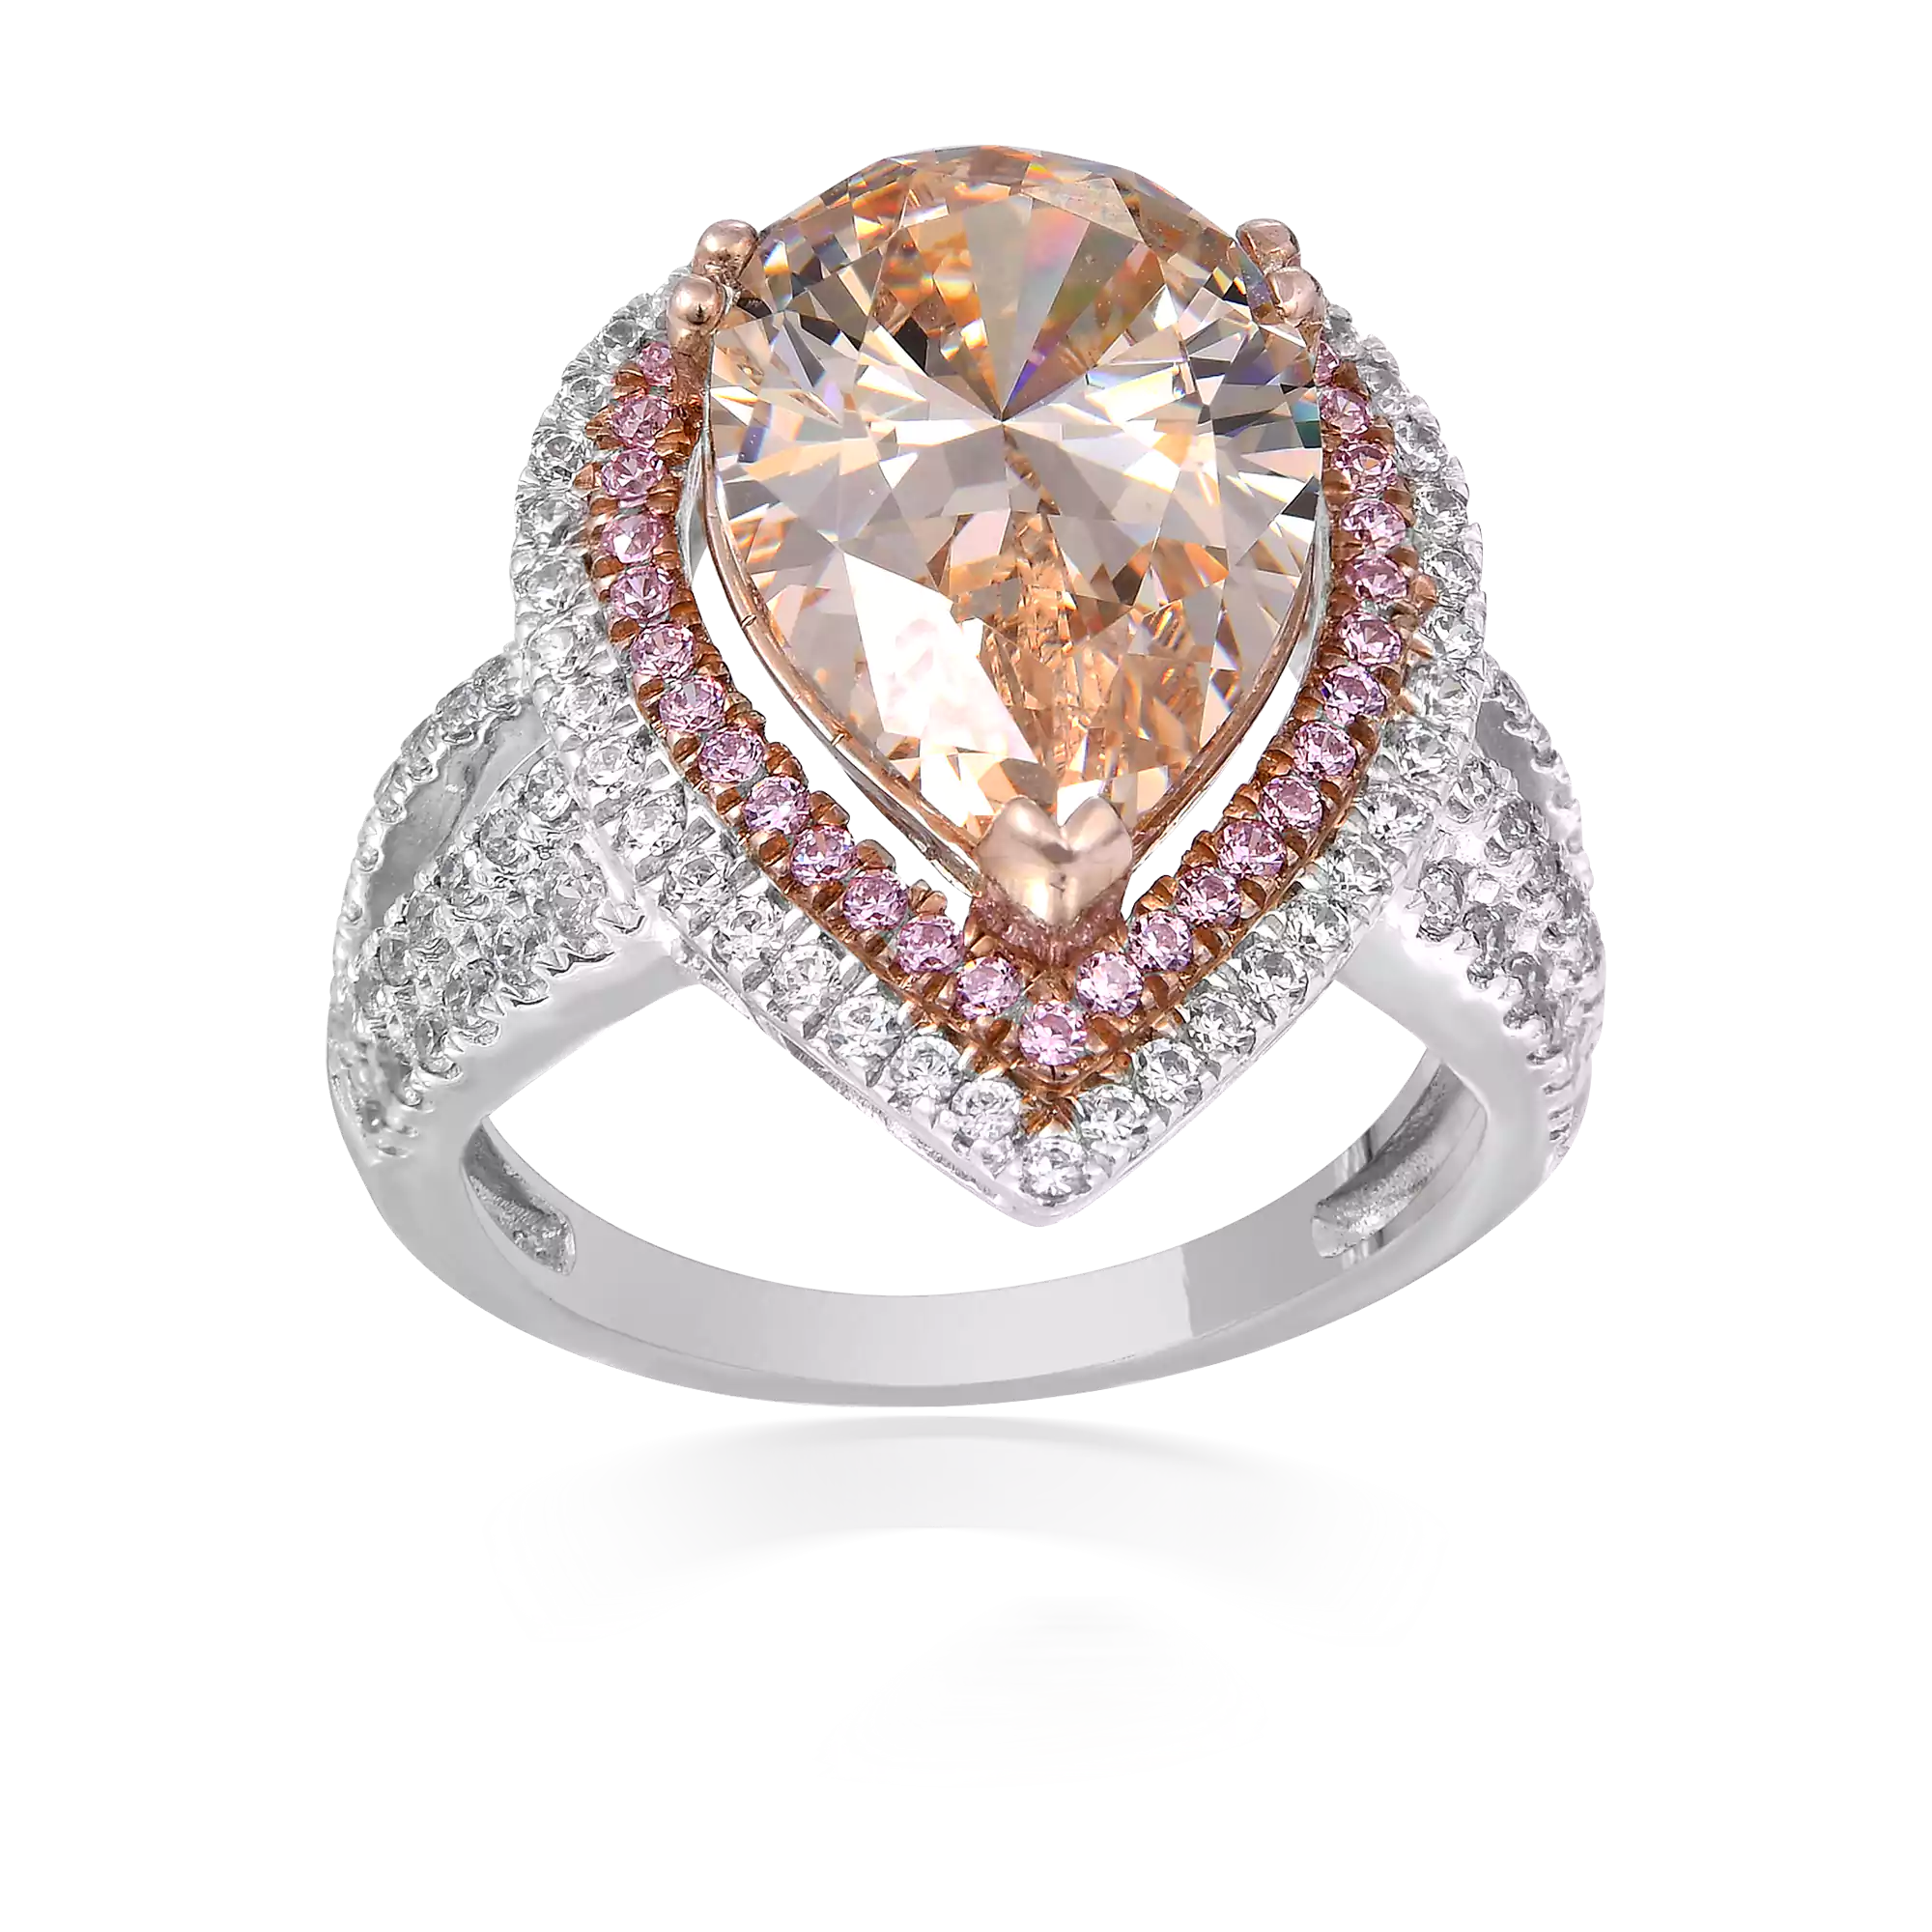 DREAMY CHAMPAGNE RING